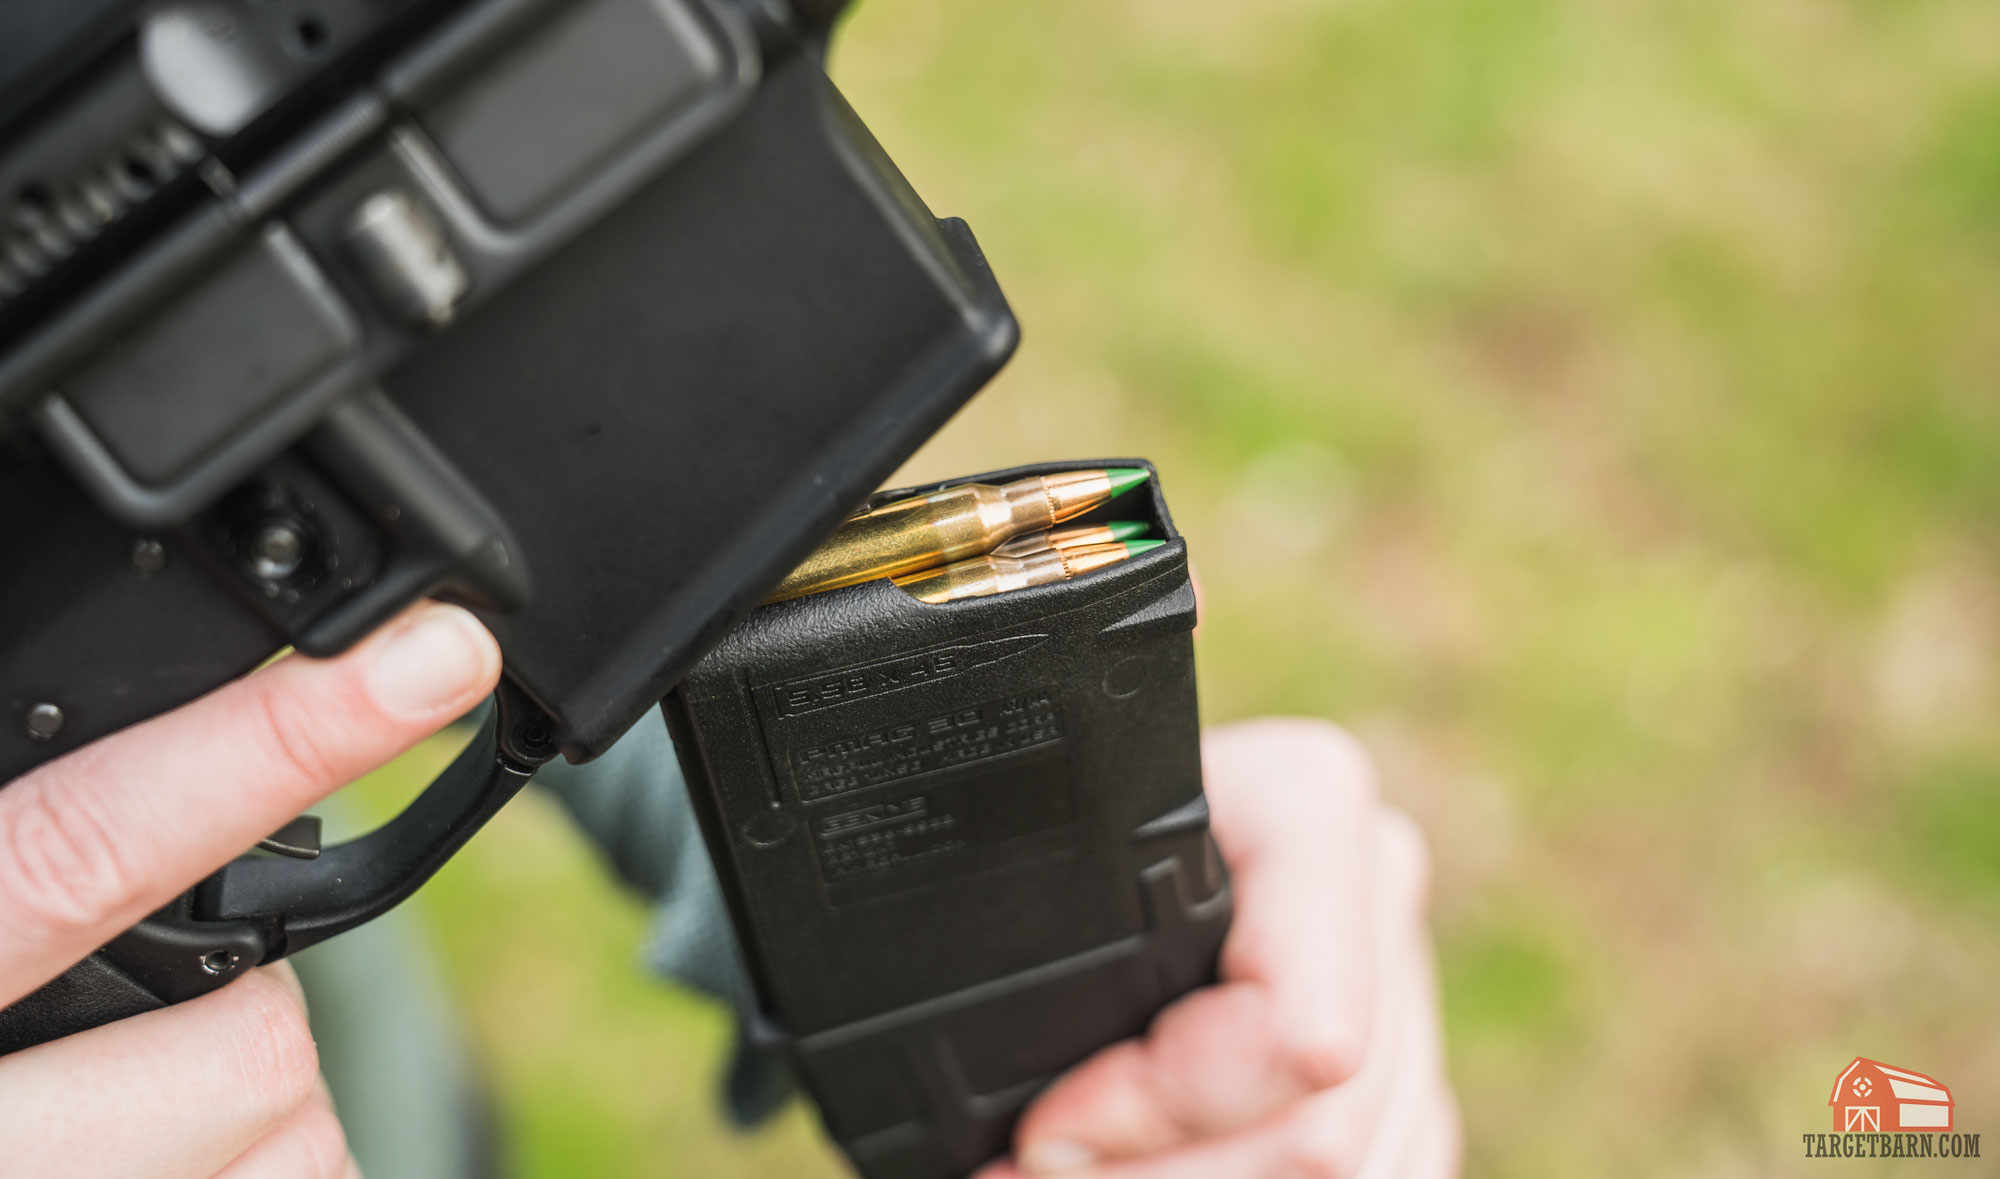 brass cased 223 in a magazine being loaded into an ar-15